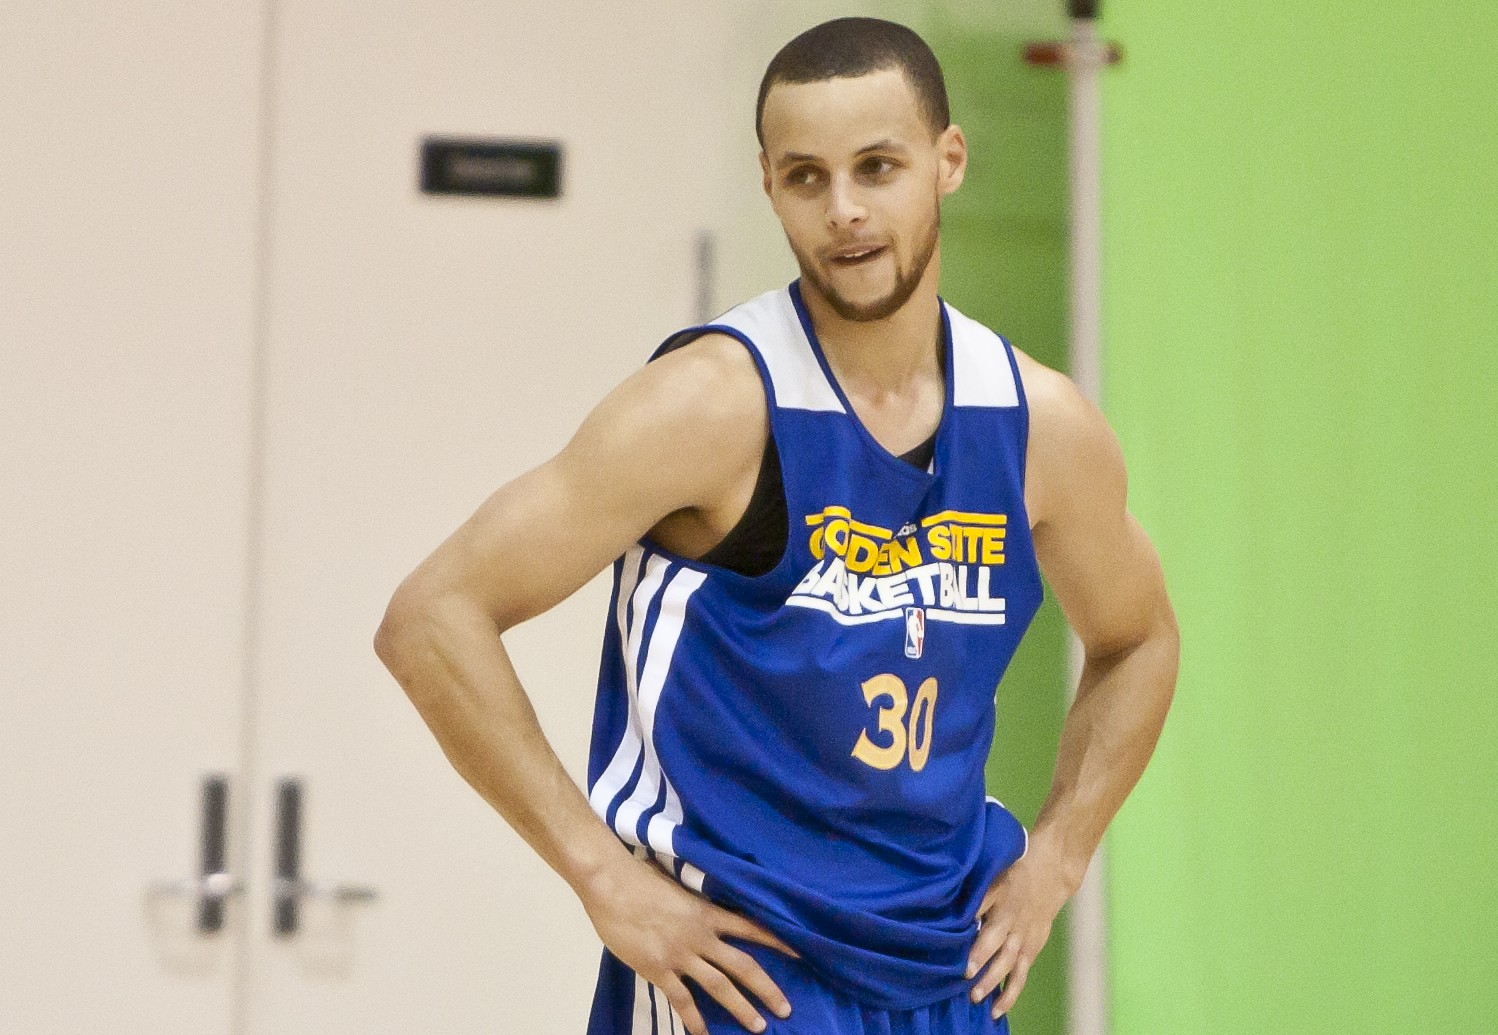 steph curry practice jersey